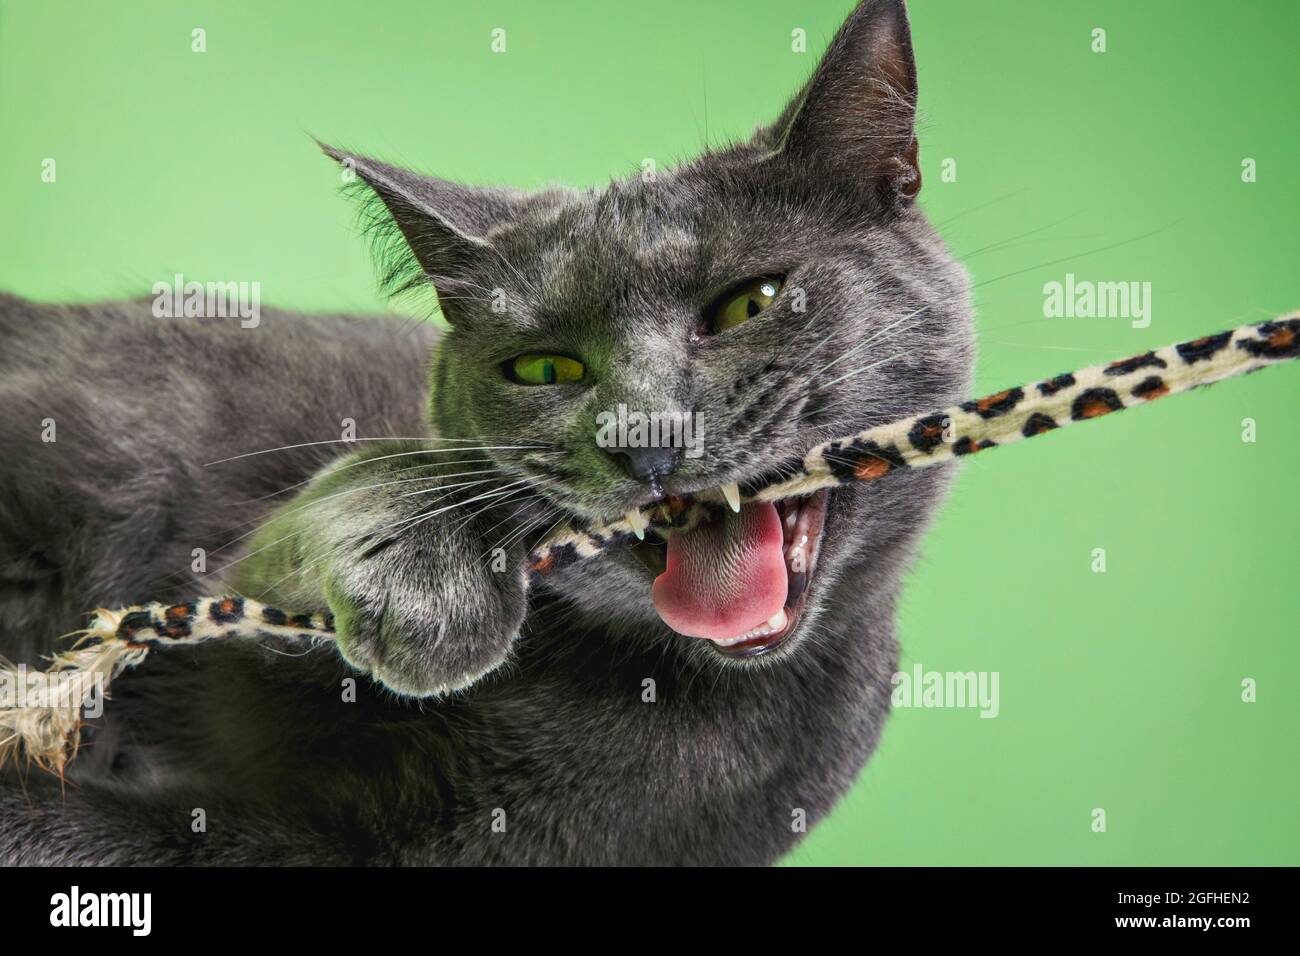 A close-up of a young gray cat on a studio backdrop attacking a wand toy with a wild expression. Stock Photo